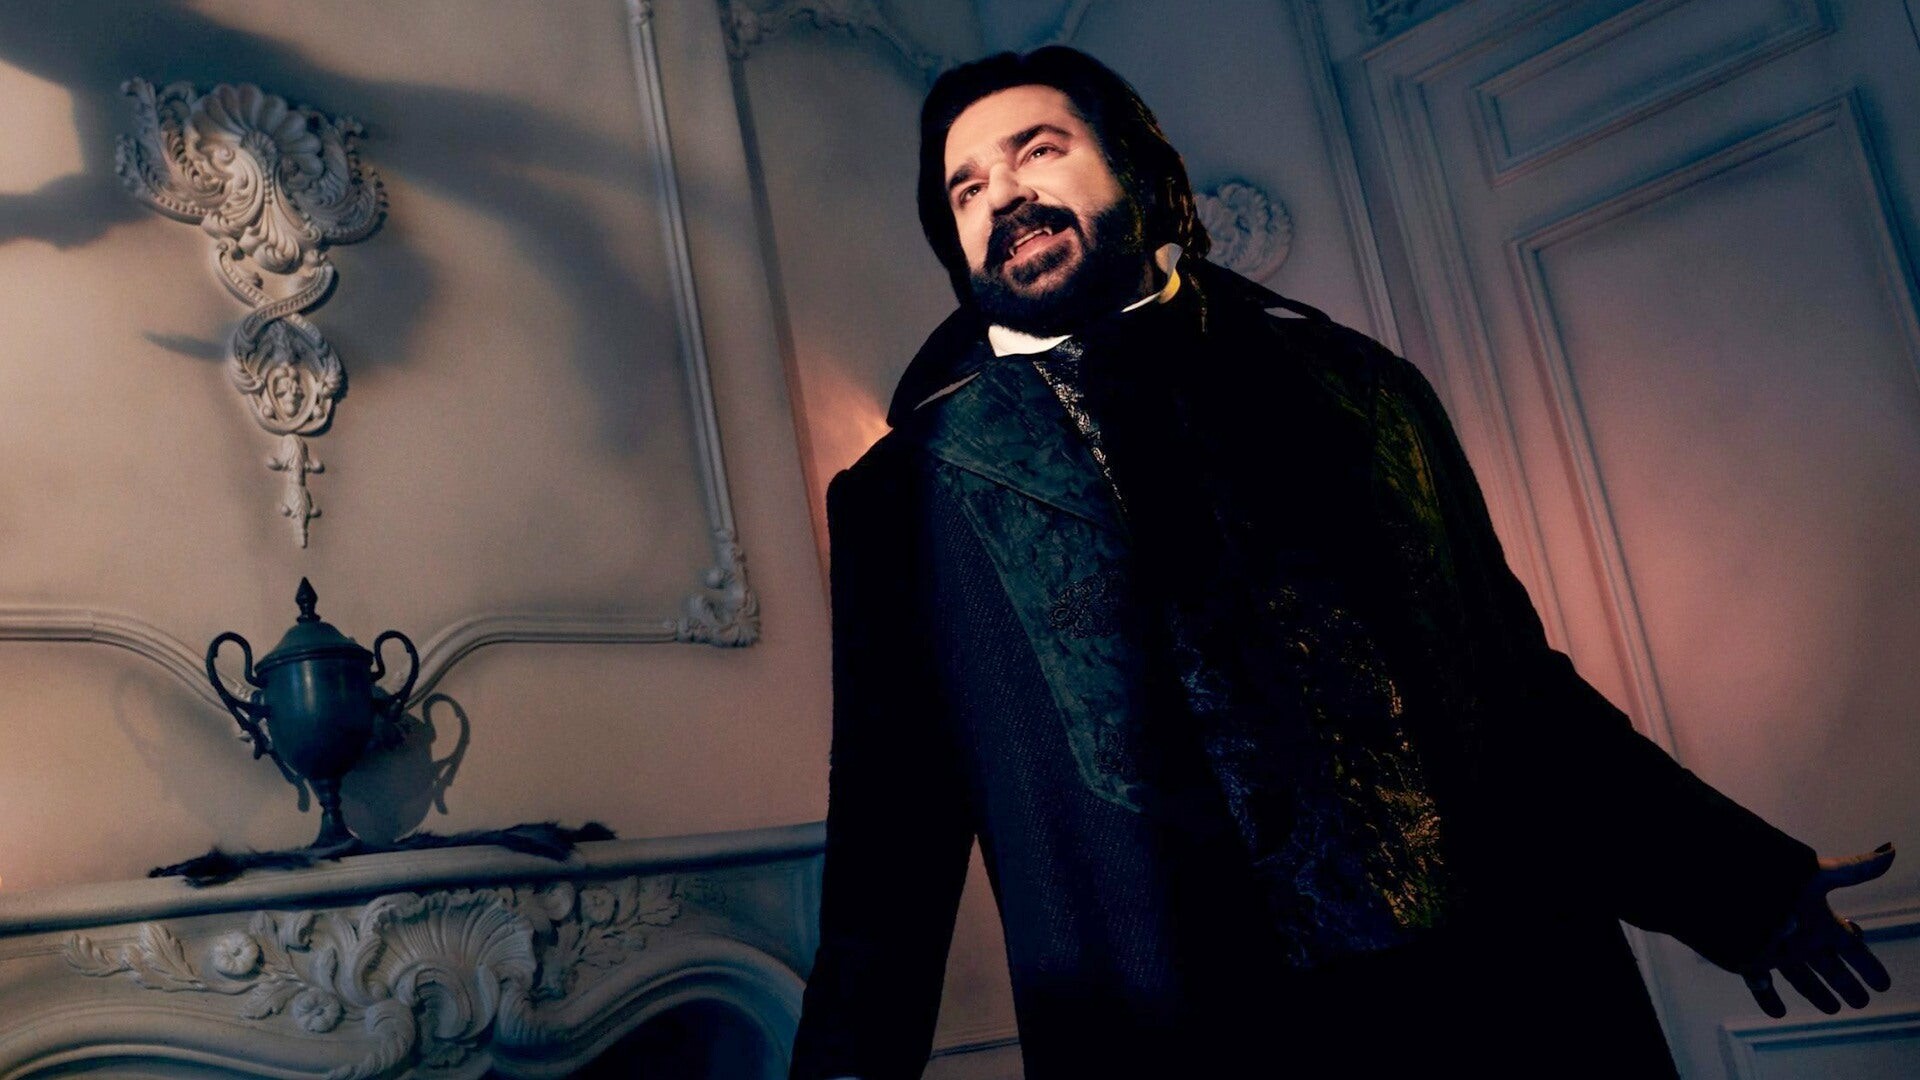 What We Do in the Shadows: Season 4, Matt Berry as Leslie "Laszlo" Cravensworth, was turned by Nadja and is now married to her. 1920x1080 Full HD Background.